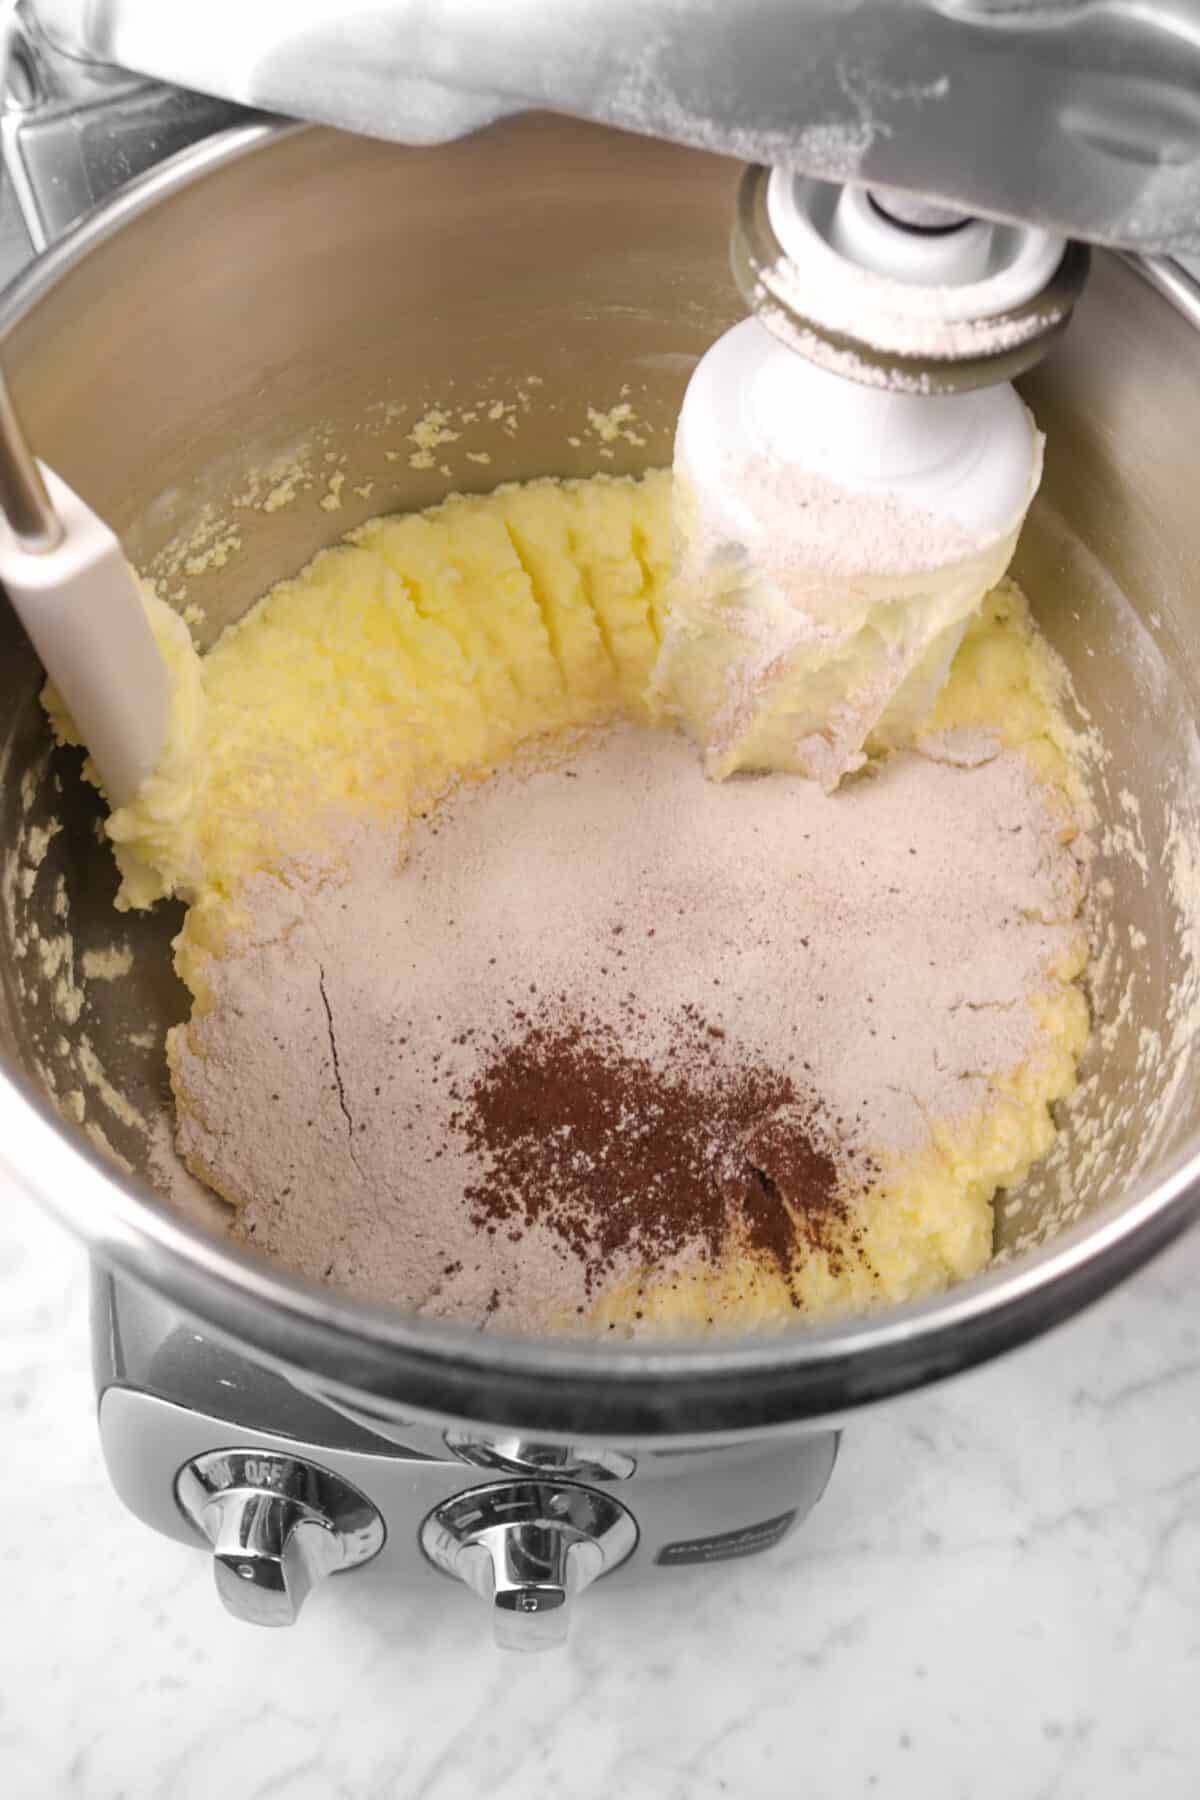 dry ingredients added to butter miture